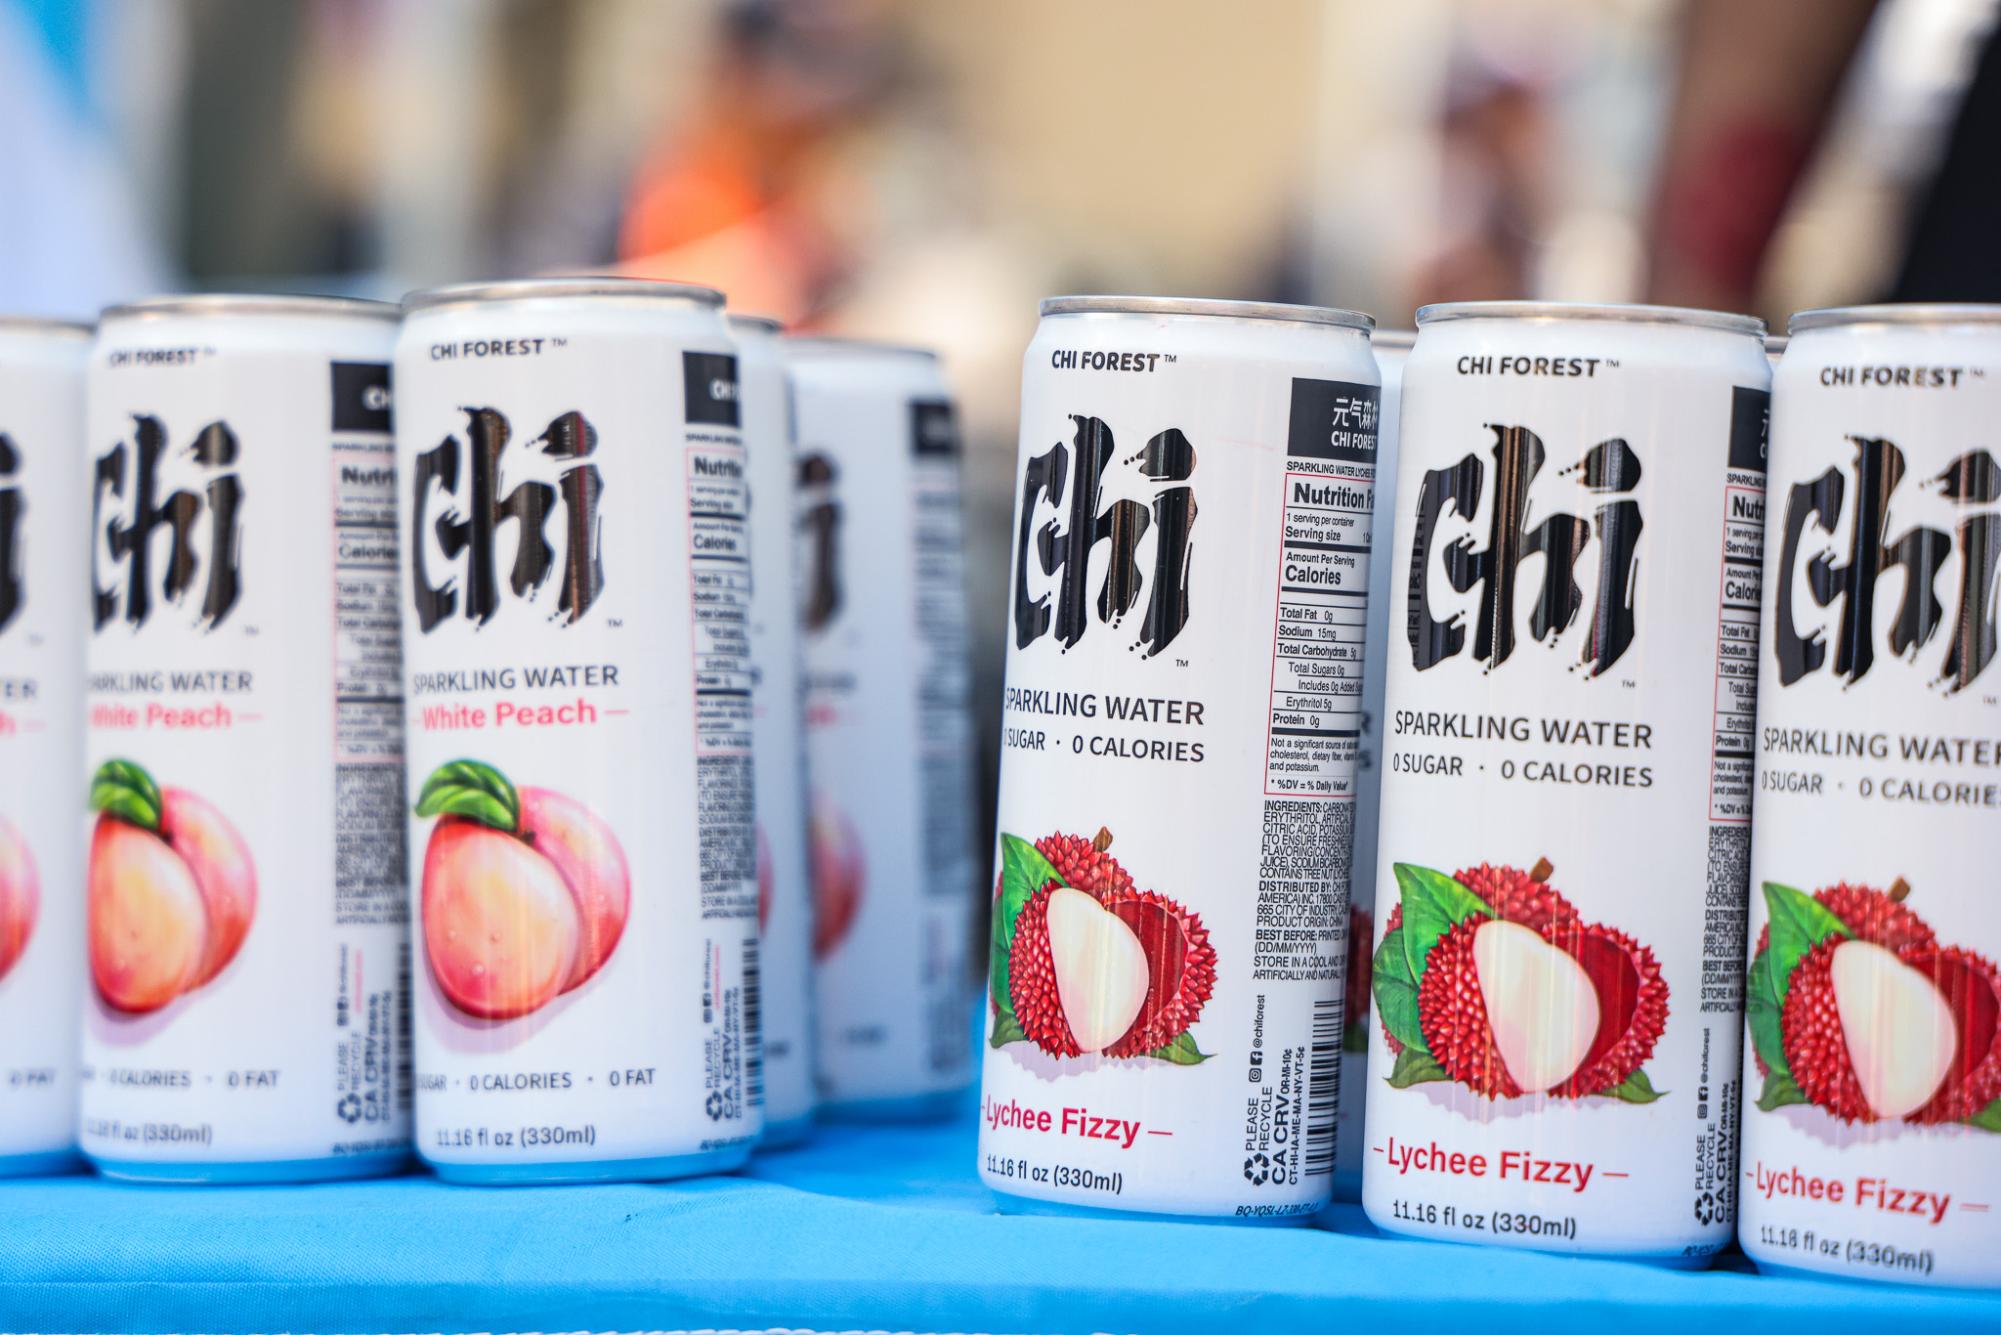 White sparkling water cans displaying various flavors labeled “CHI.”